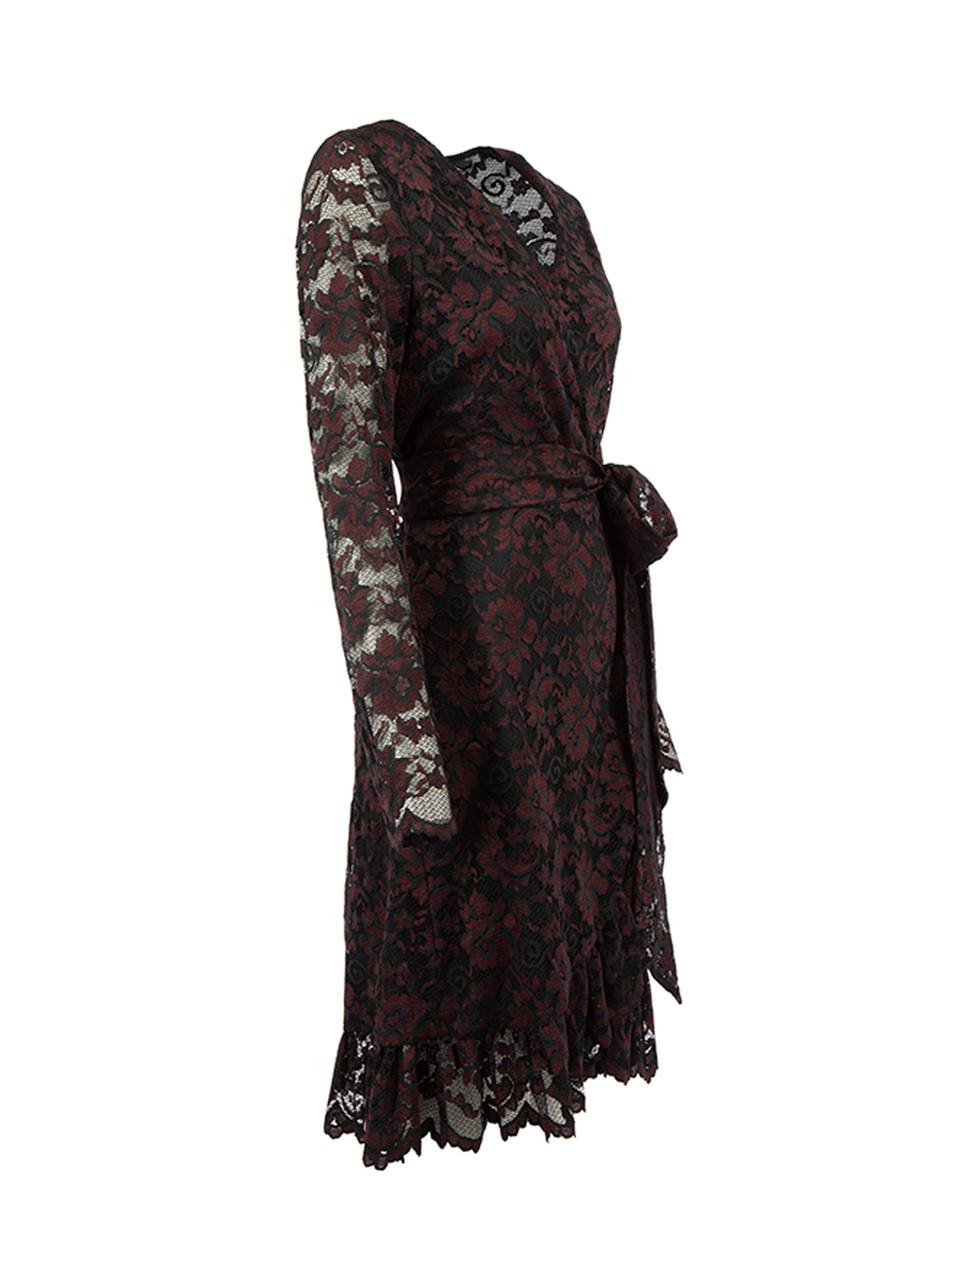 CONDITION is Very good. Hardly any visible wear to dress is evident on this used Ganni designer resale item.



Details


Burgundy and black

Floral lace

Wrap dress

Mini length

V neckline

Tie waist closure





Made in China



Composition

67%